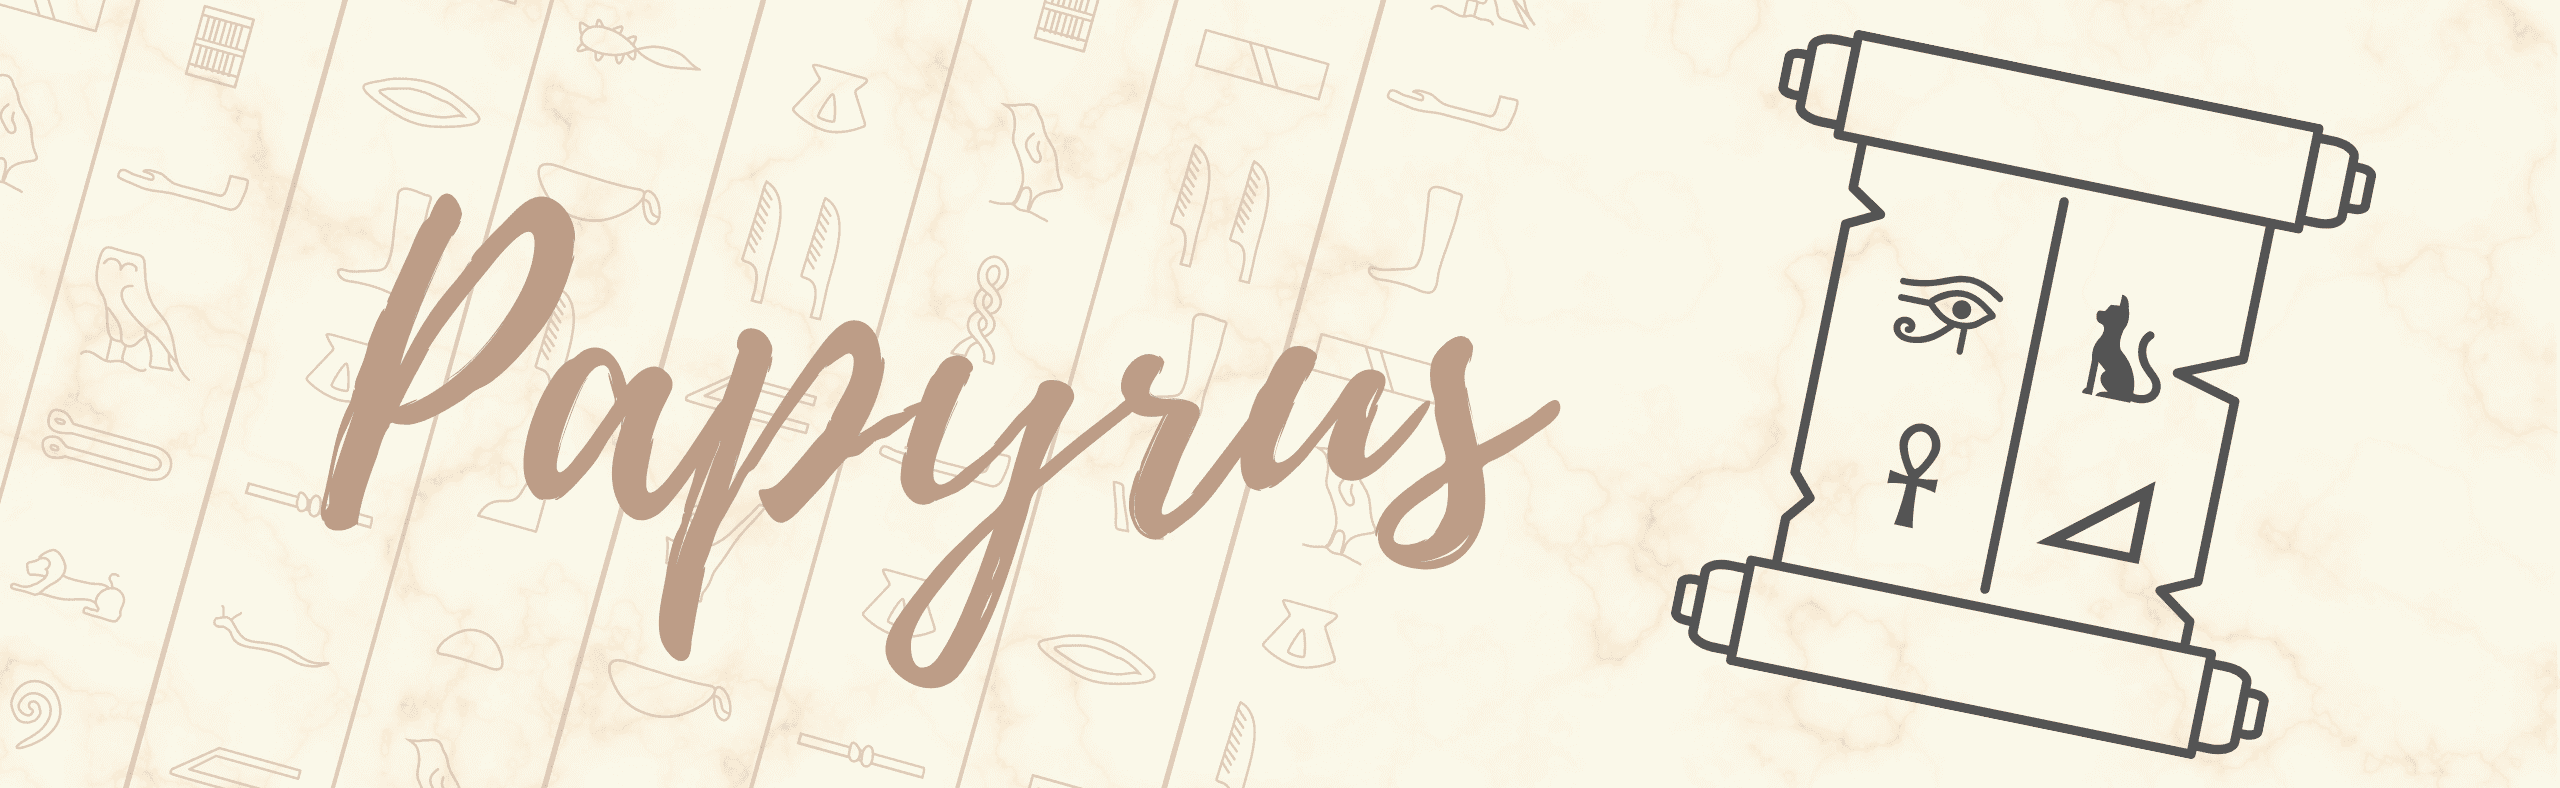 papayrus product banner